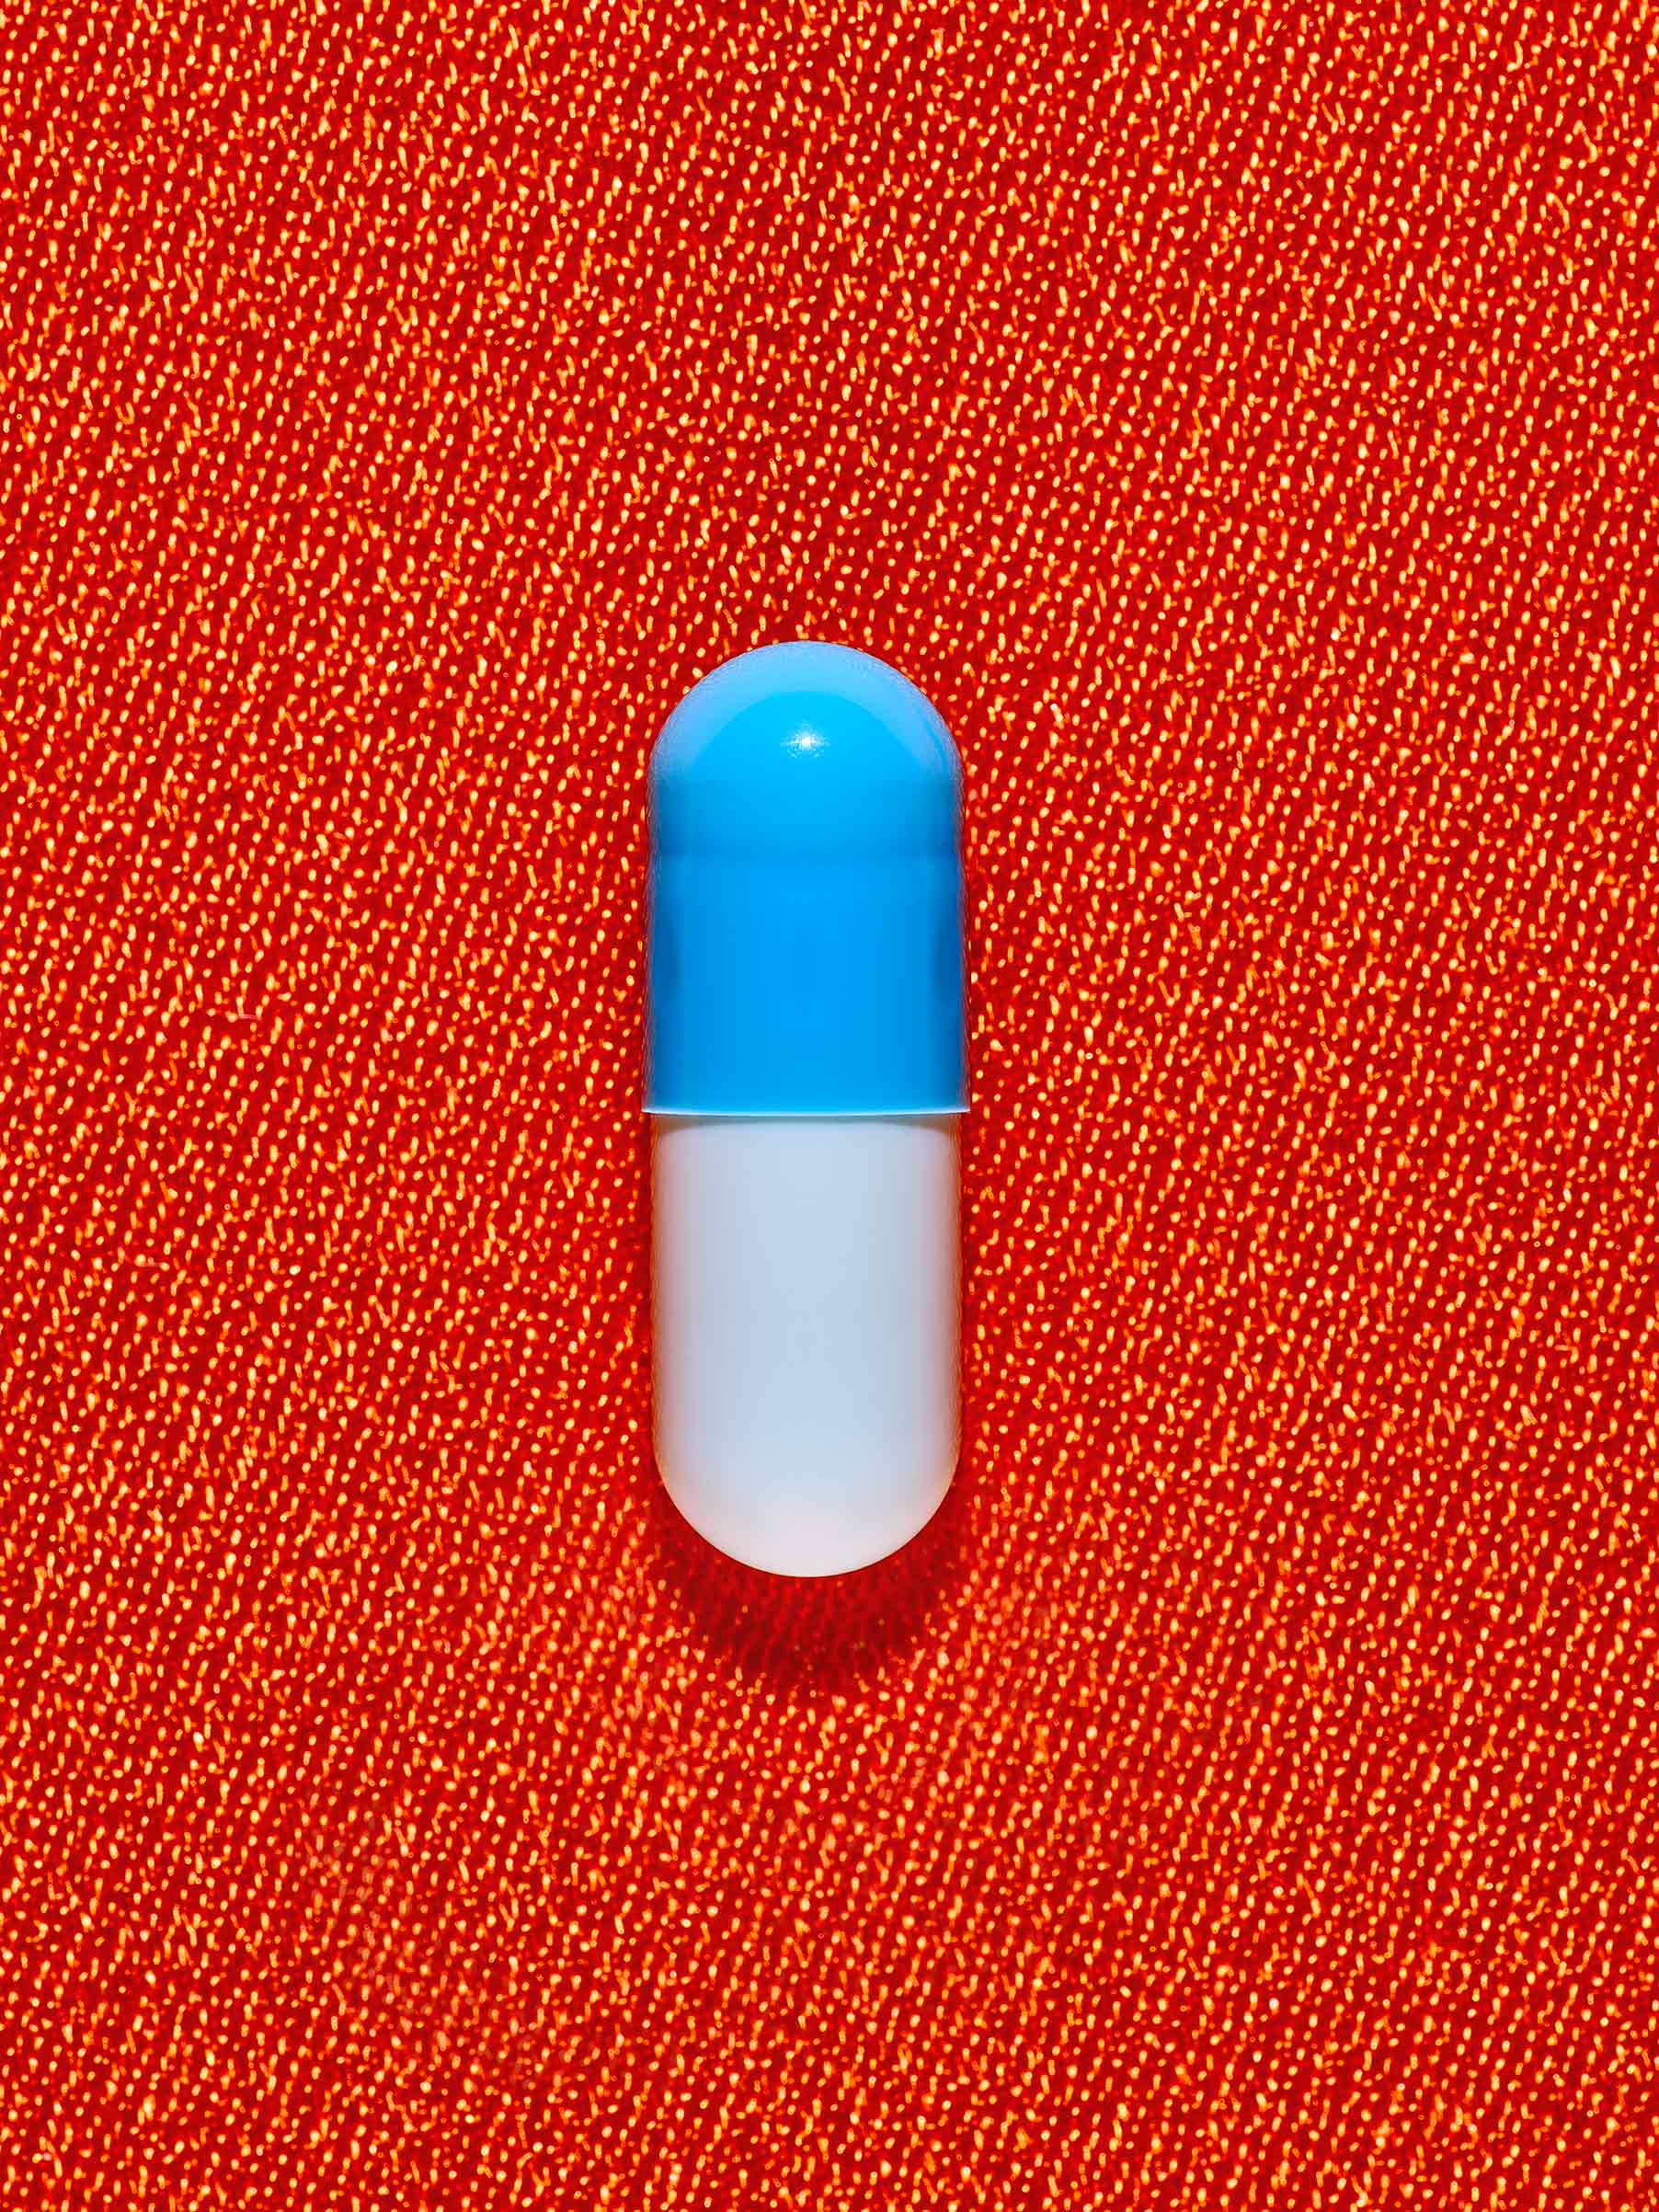 People Are Now Taking Placebo Pills to Treat Themselves | Time